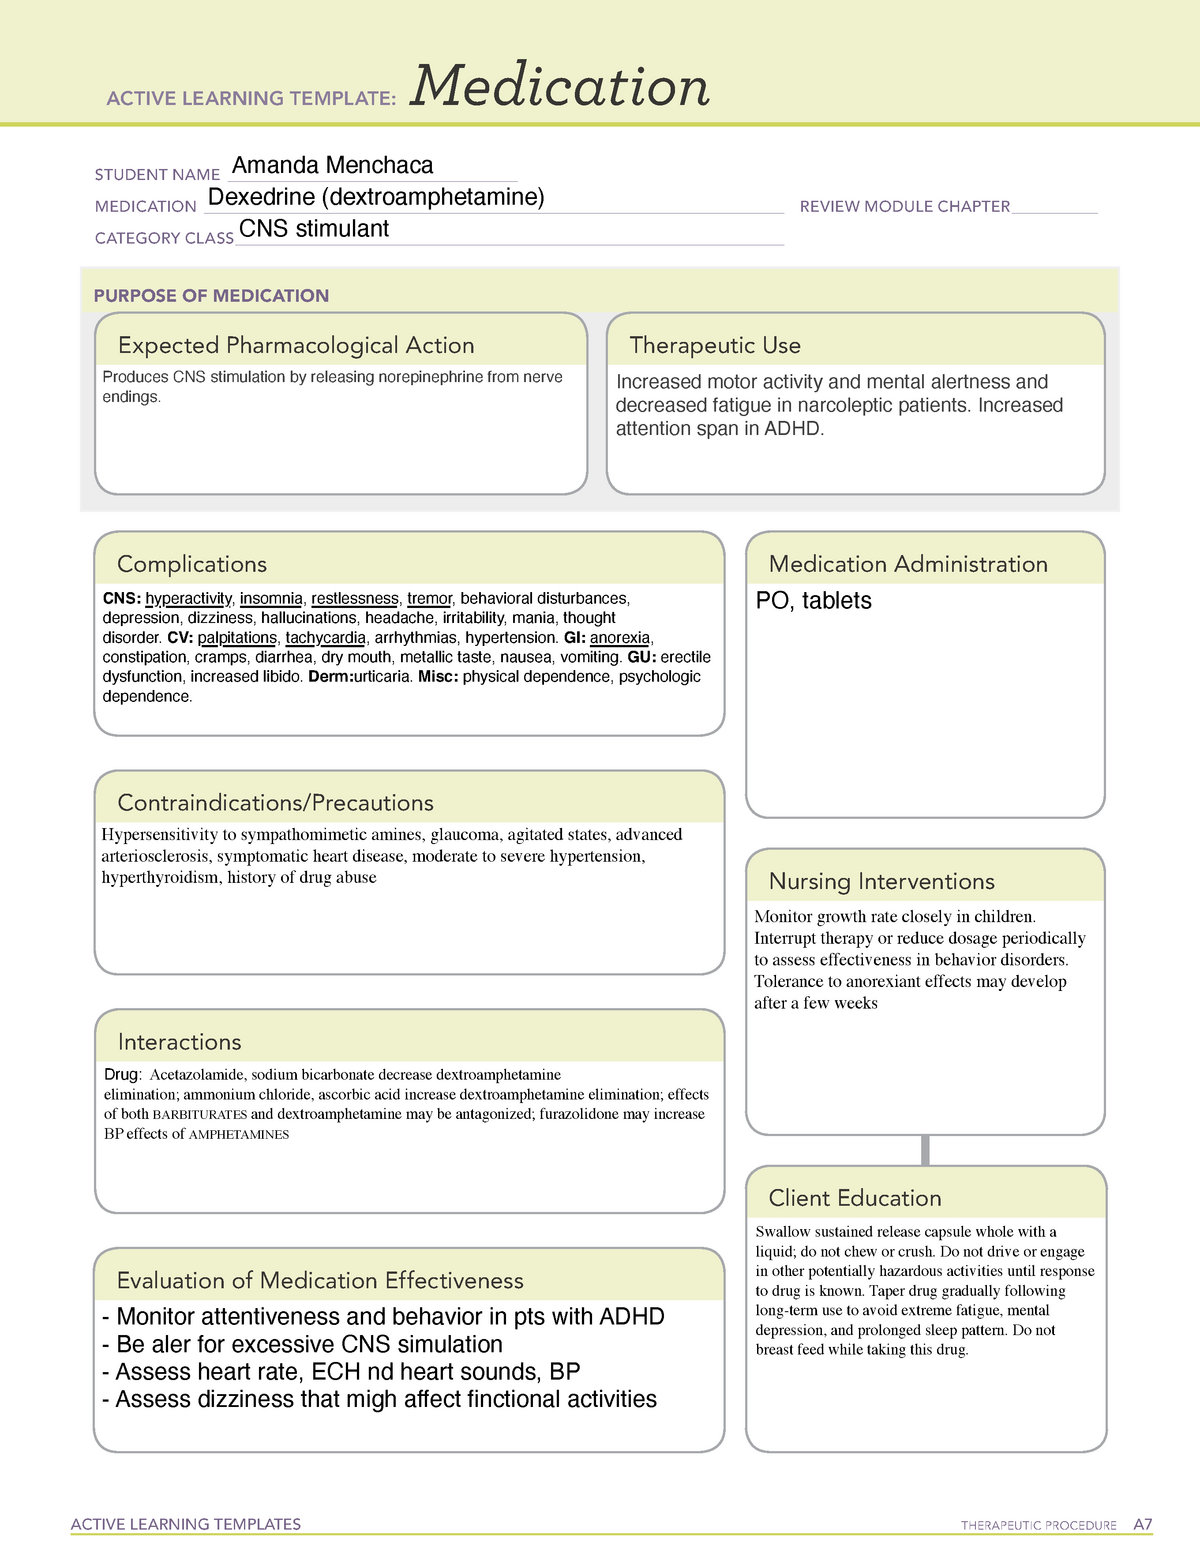 DexedrineMED ATI medication card template ACTIVE LEARNING